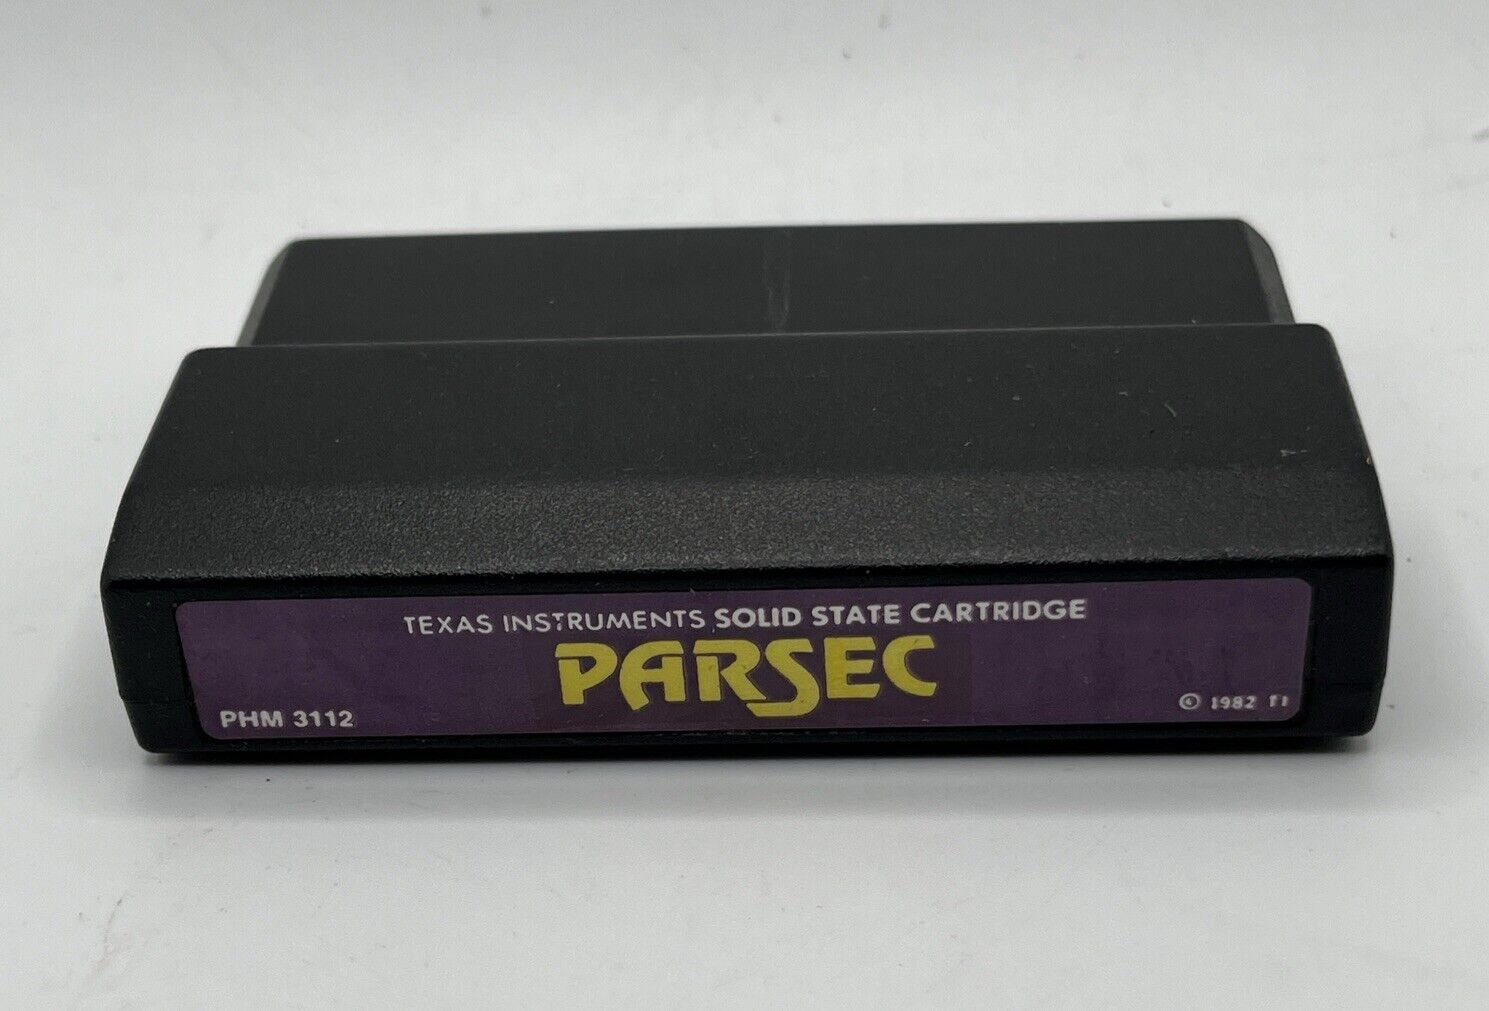 Parsec Game Cartridge for Texas Instruments TI-99/4A 1982 PHM 3112 Jim Dramis